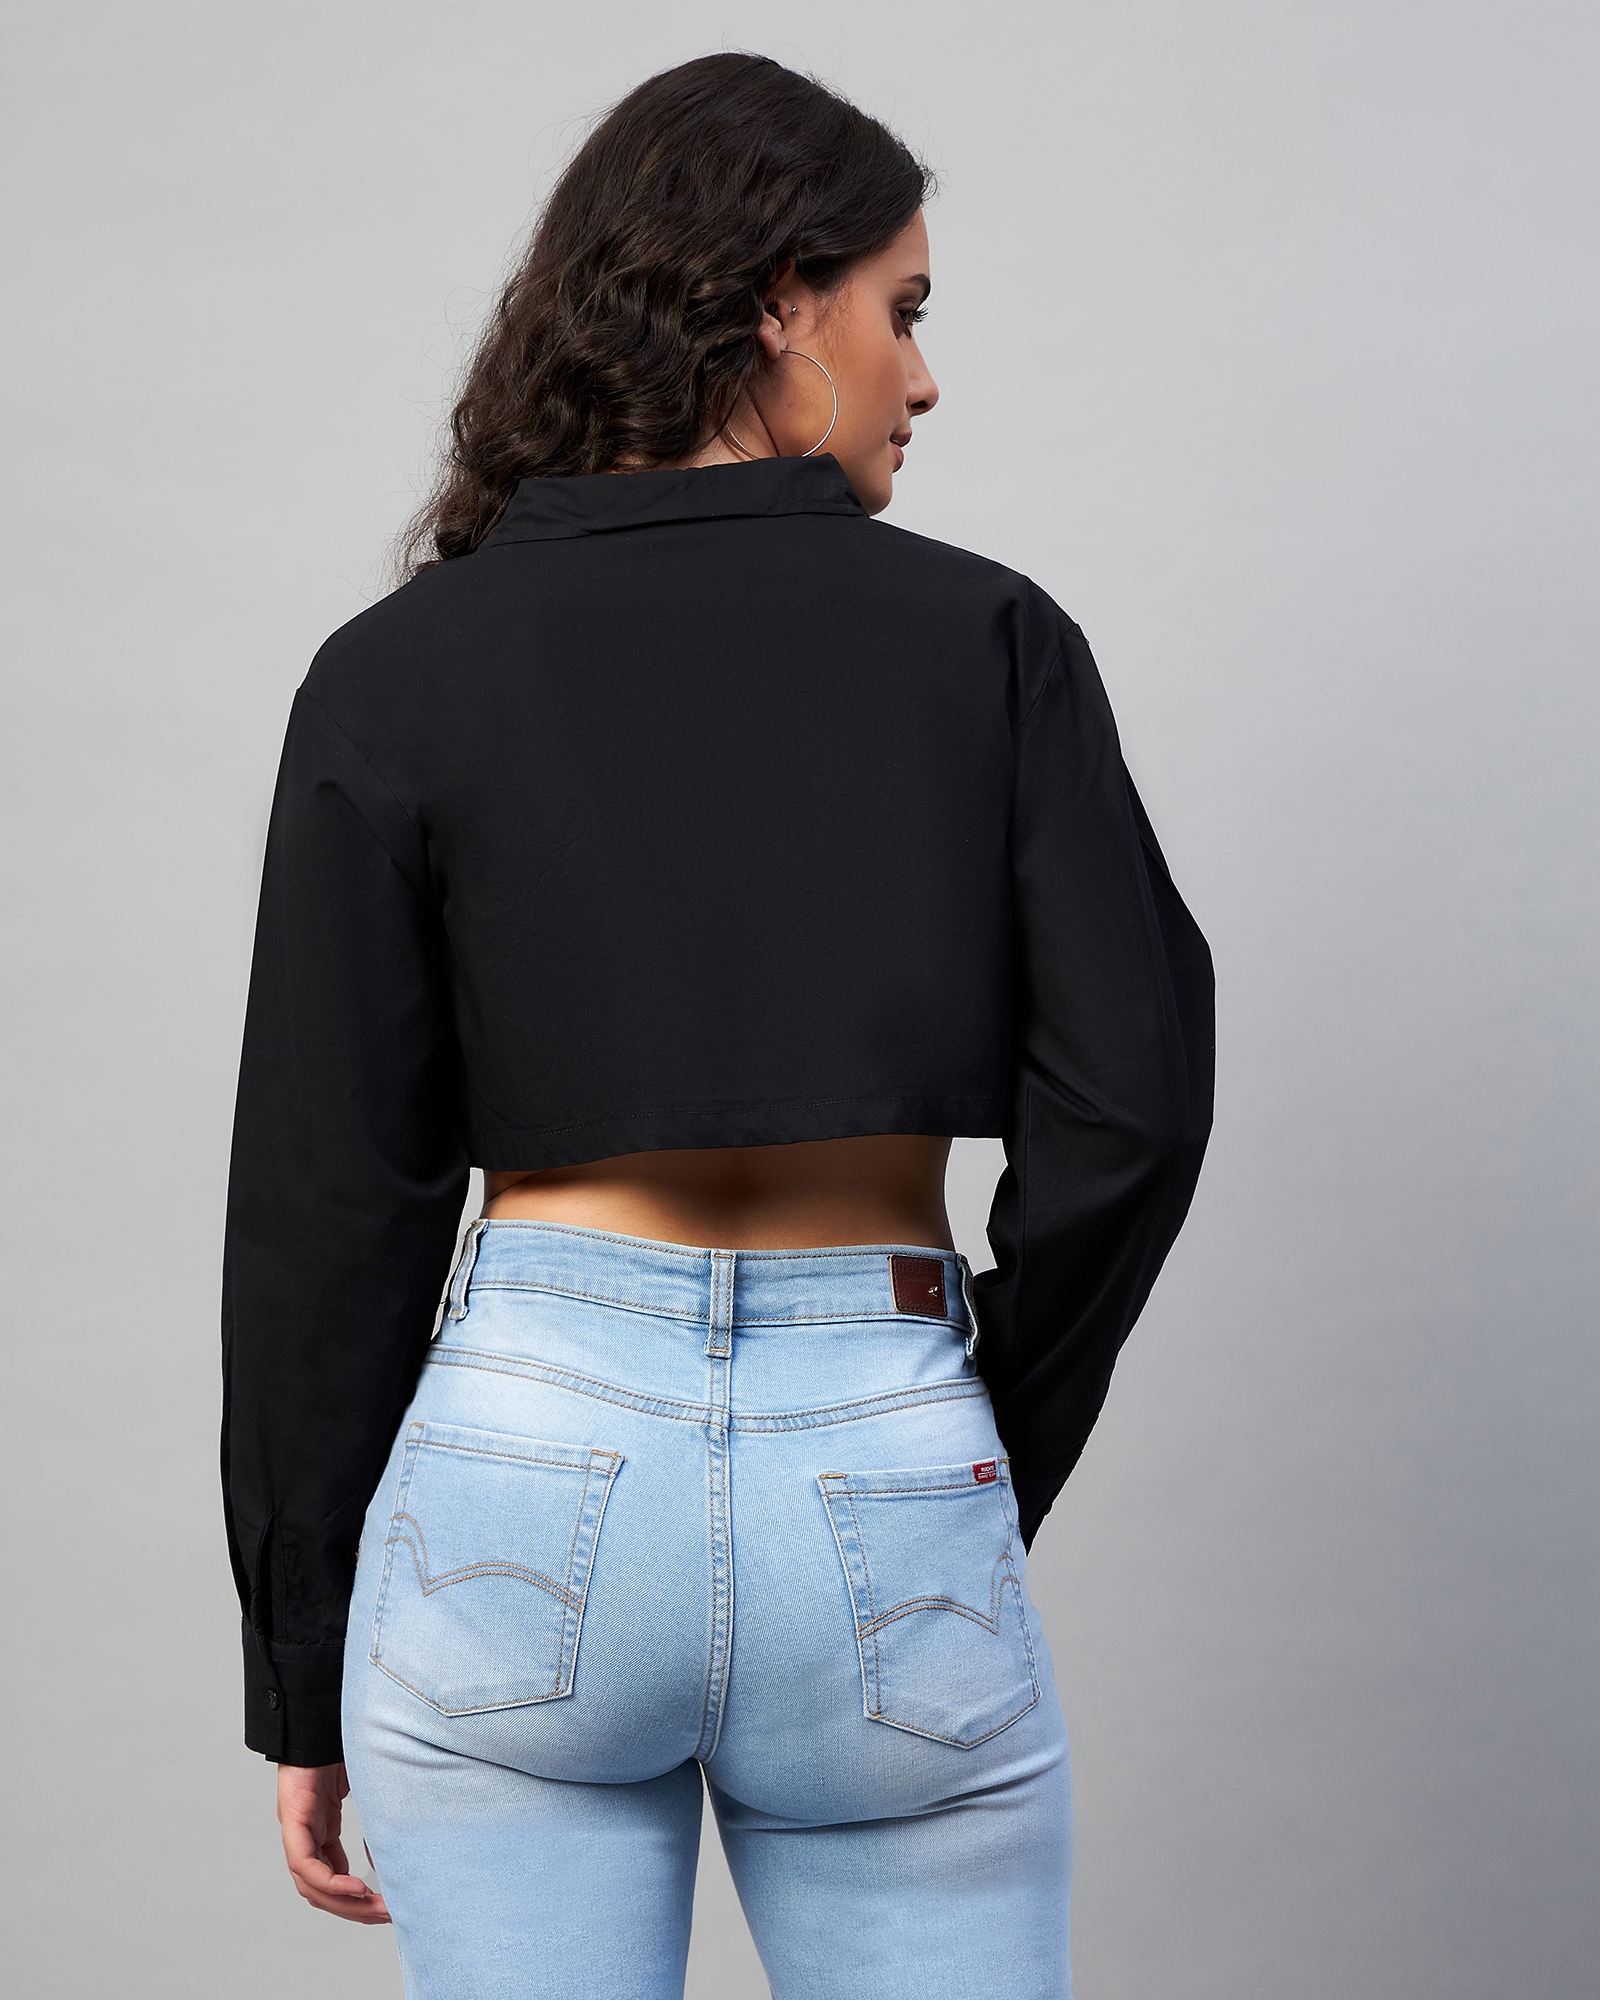 Chimpaaanzee Women Cotton Black Solid Fully Cropped Shirt